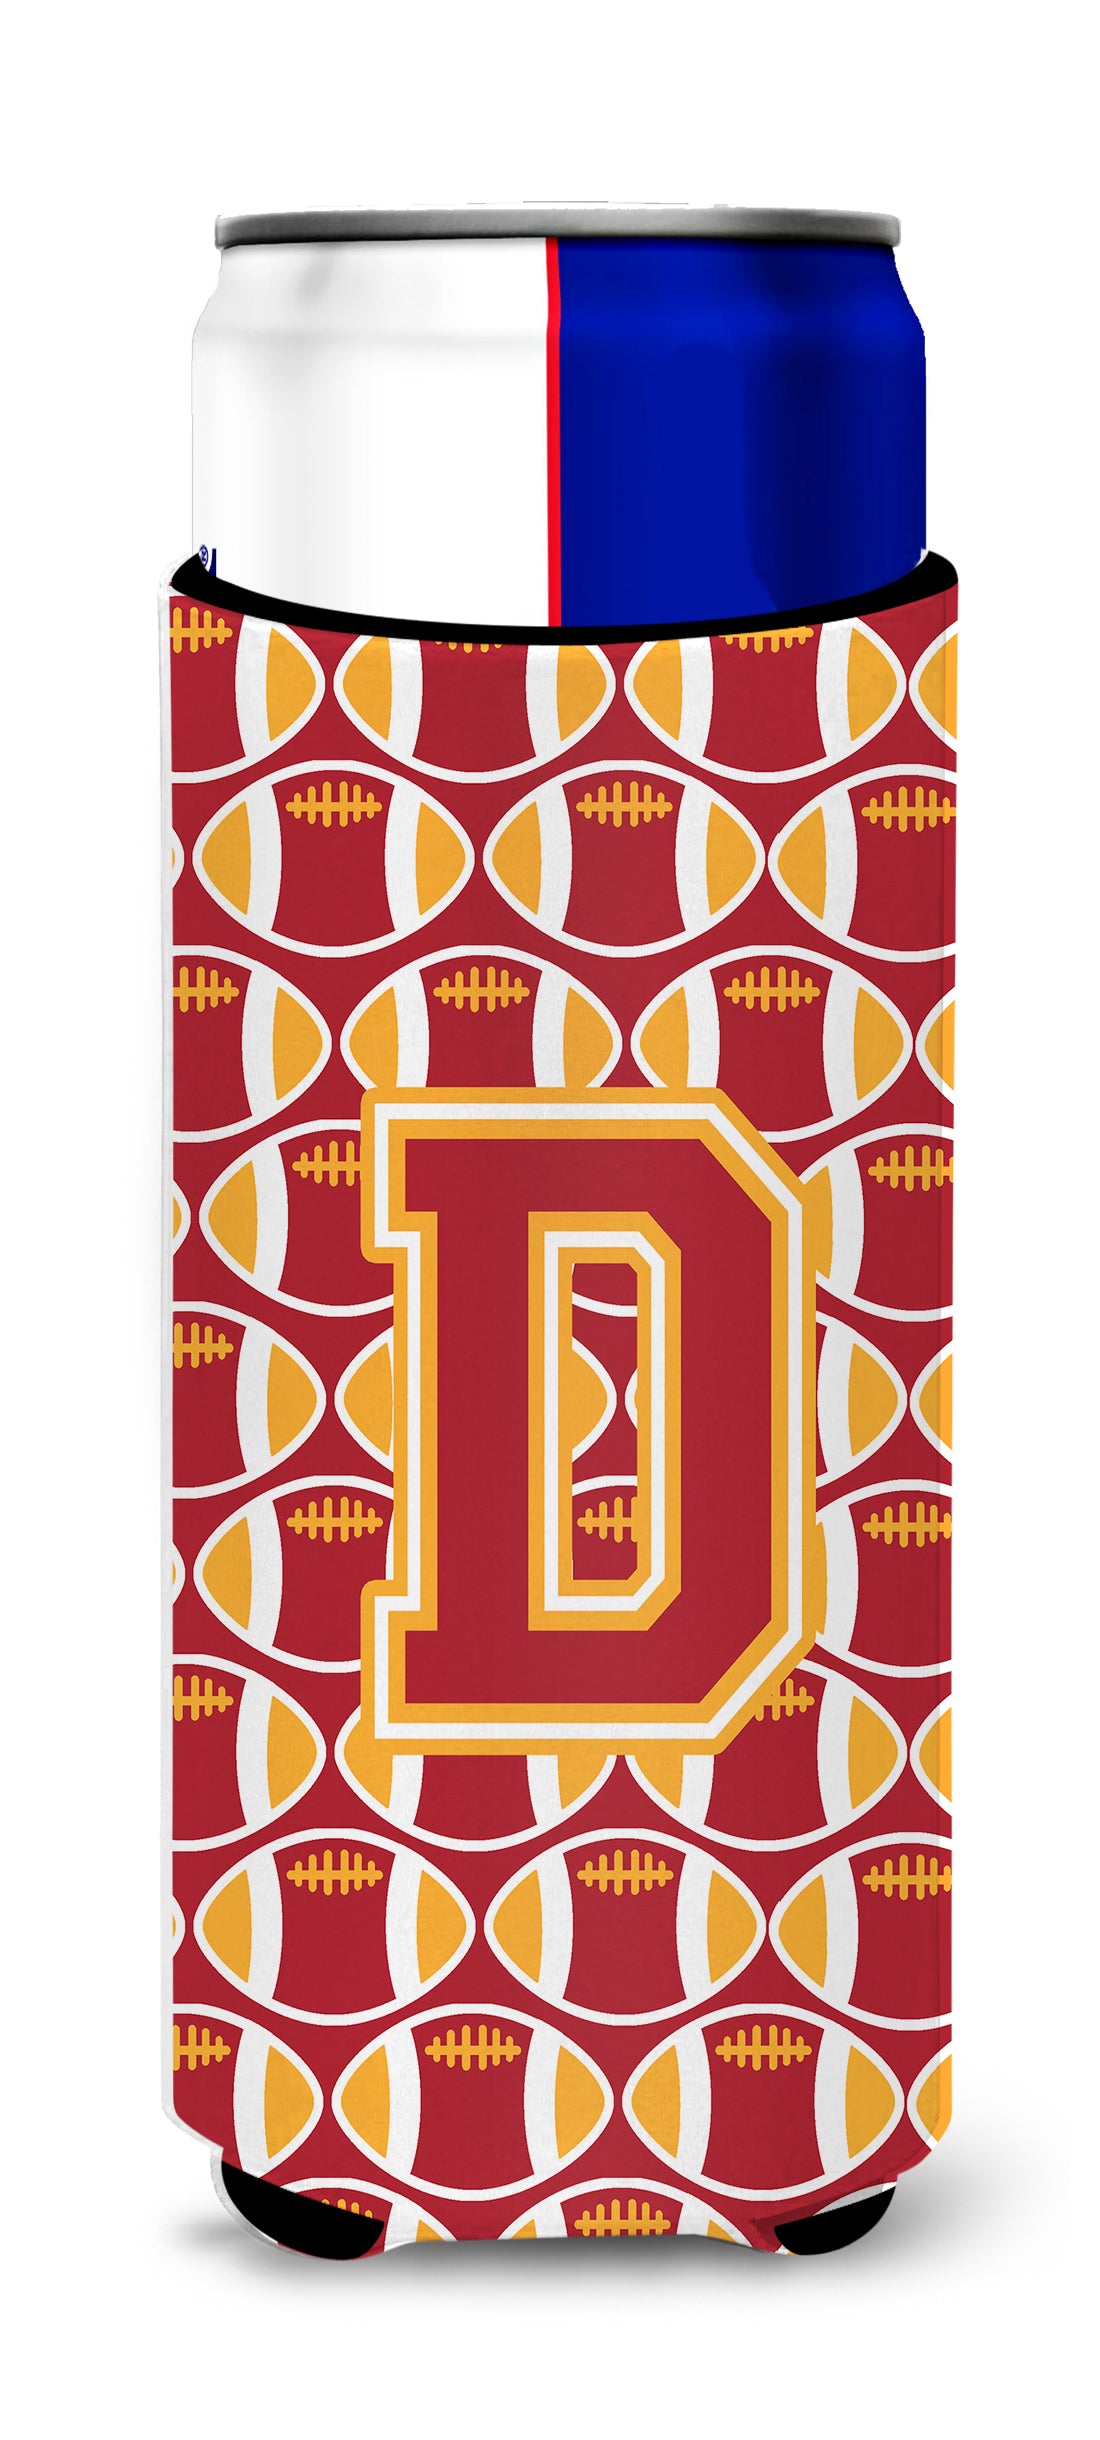 Letter D Football Cardinal and Gold Ultra Beverage Insulators for slim cans CJ1070-DMUK